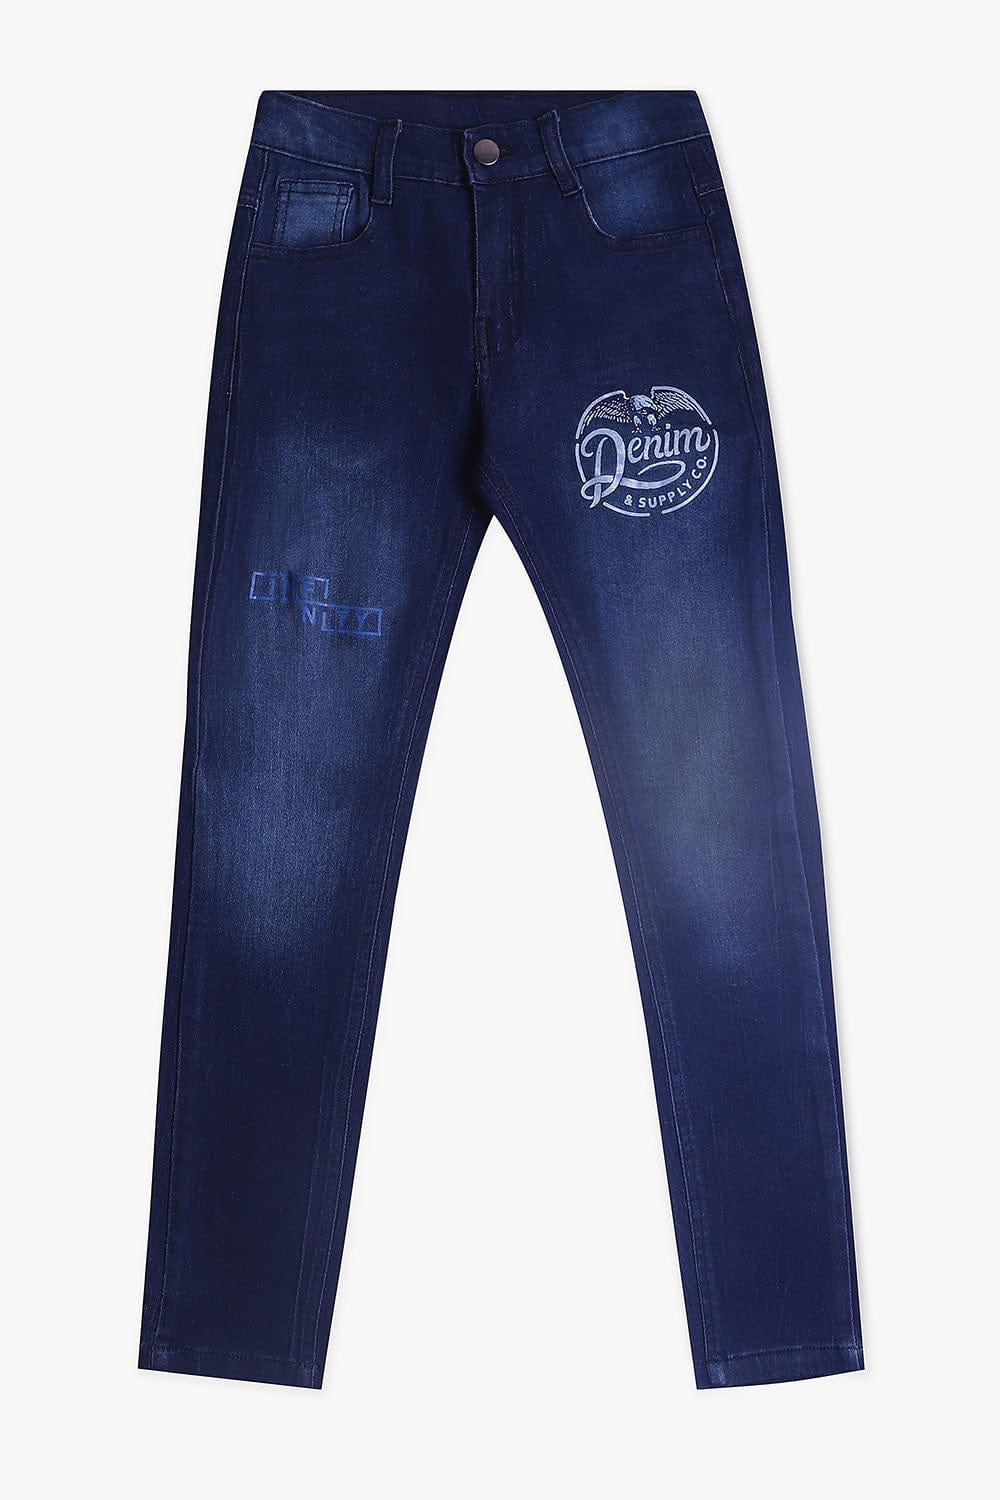 Hope Not Out by Shahid Afridi Boys Denim Pants Graphic Denim